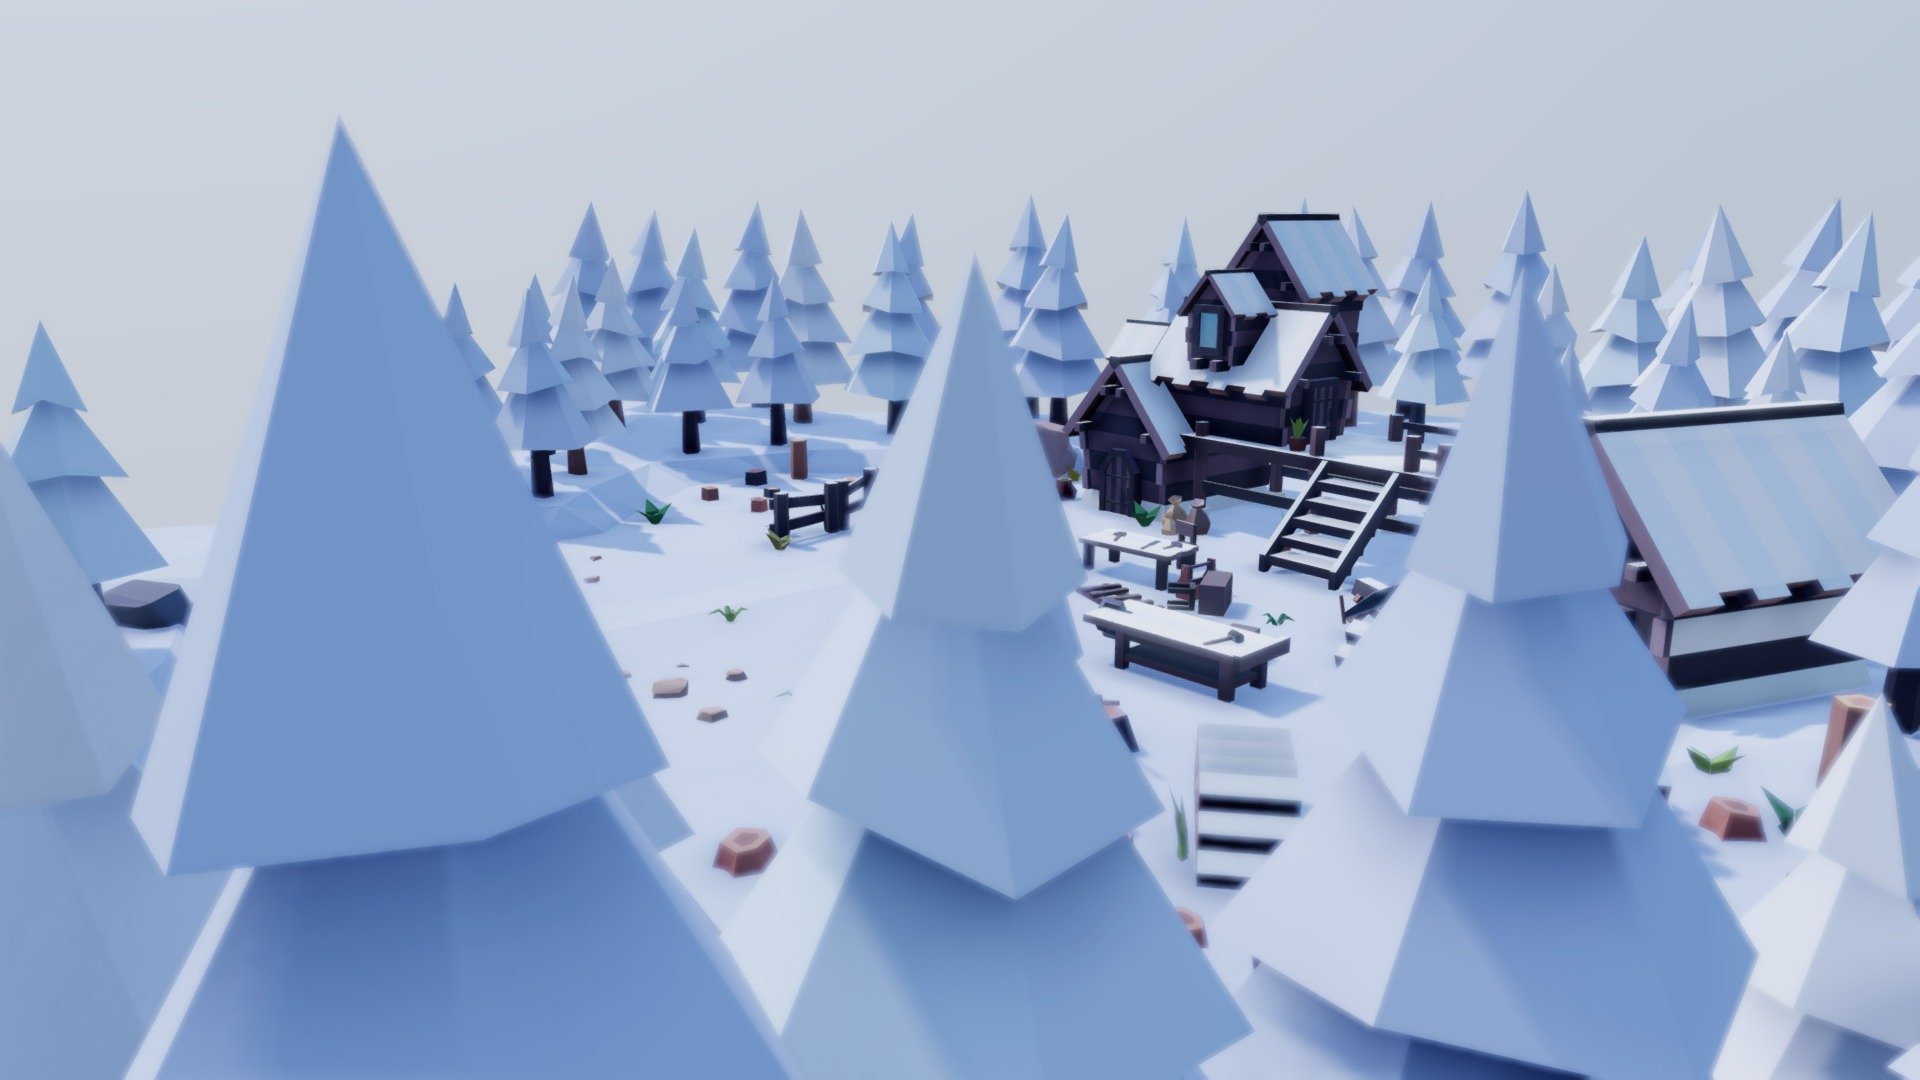 Tarbo - Fantasy Village
A low poly asset pack of Fantasy themed polygonal style game.
Modular parts are easy to piece together in a variety of combinations.
This product is designed to TopDown, RPG, Adventure, RTS.
You can create beautiful, diverse villages of your own.


Download

FEATURES



485 Useful prefabs

3 Color themes (6 colors with snow version) + 1 autumn version

57 Modular building parts

37 Premade buildings

26 Grounds

216 Props

149 Environment objects

11 Scenes in Various Styles

Lightmap Support

Simple polygonal style

Optimized meshes useful for mobile, AR, VR, PC

Works in Unity 2019.4 and above

Support Universal Render Pipeline (URP)


UPDATES &amp; NEWS



WEBSITE
 - Fantasy Village "Lumbermill  Winter" - 3D model by Tarbo Studios (@tarboStudios) 3d model